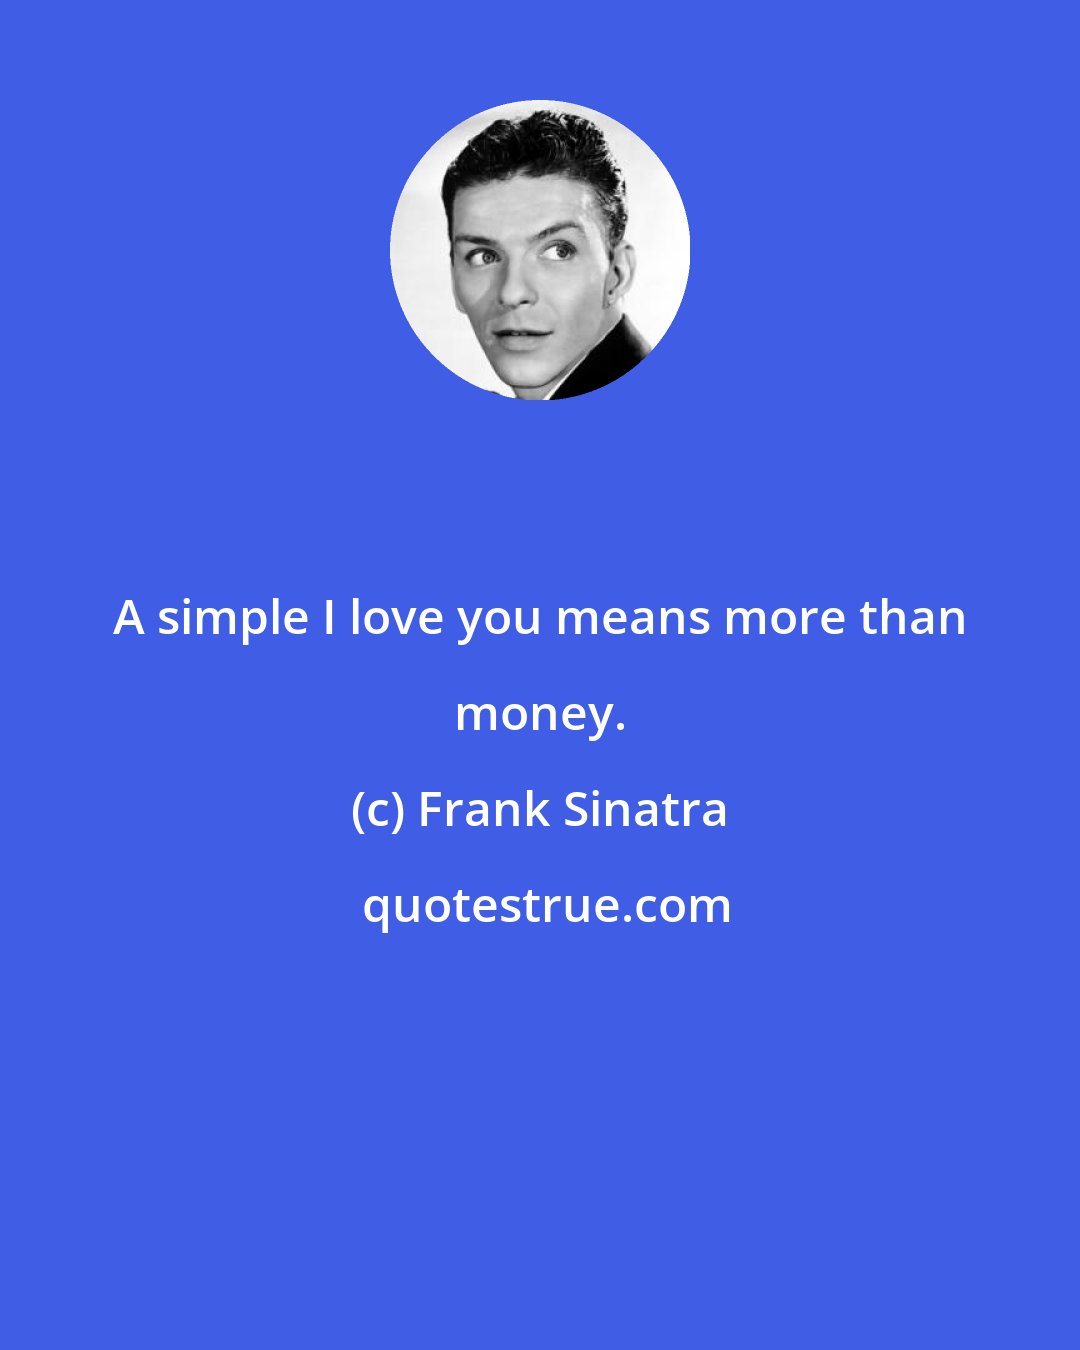 Frank Sinatra: A simple I love you means more than money.